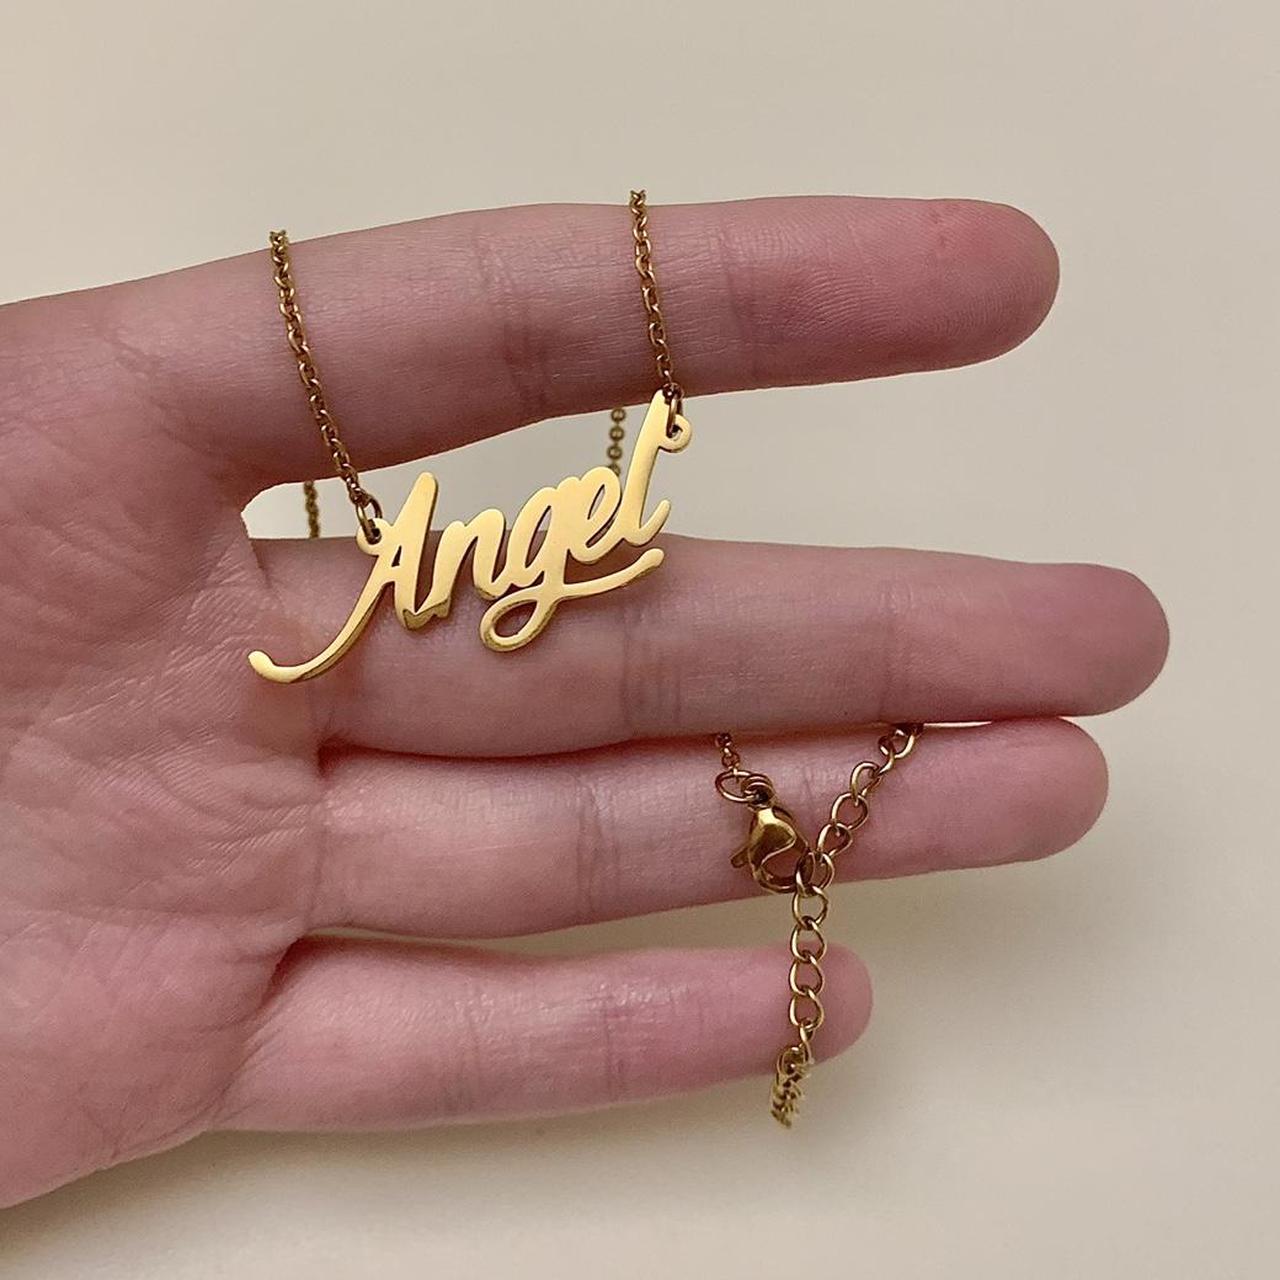 Gold angel chain necklace! 👼 Very cute accessory ✨